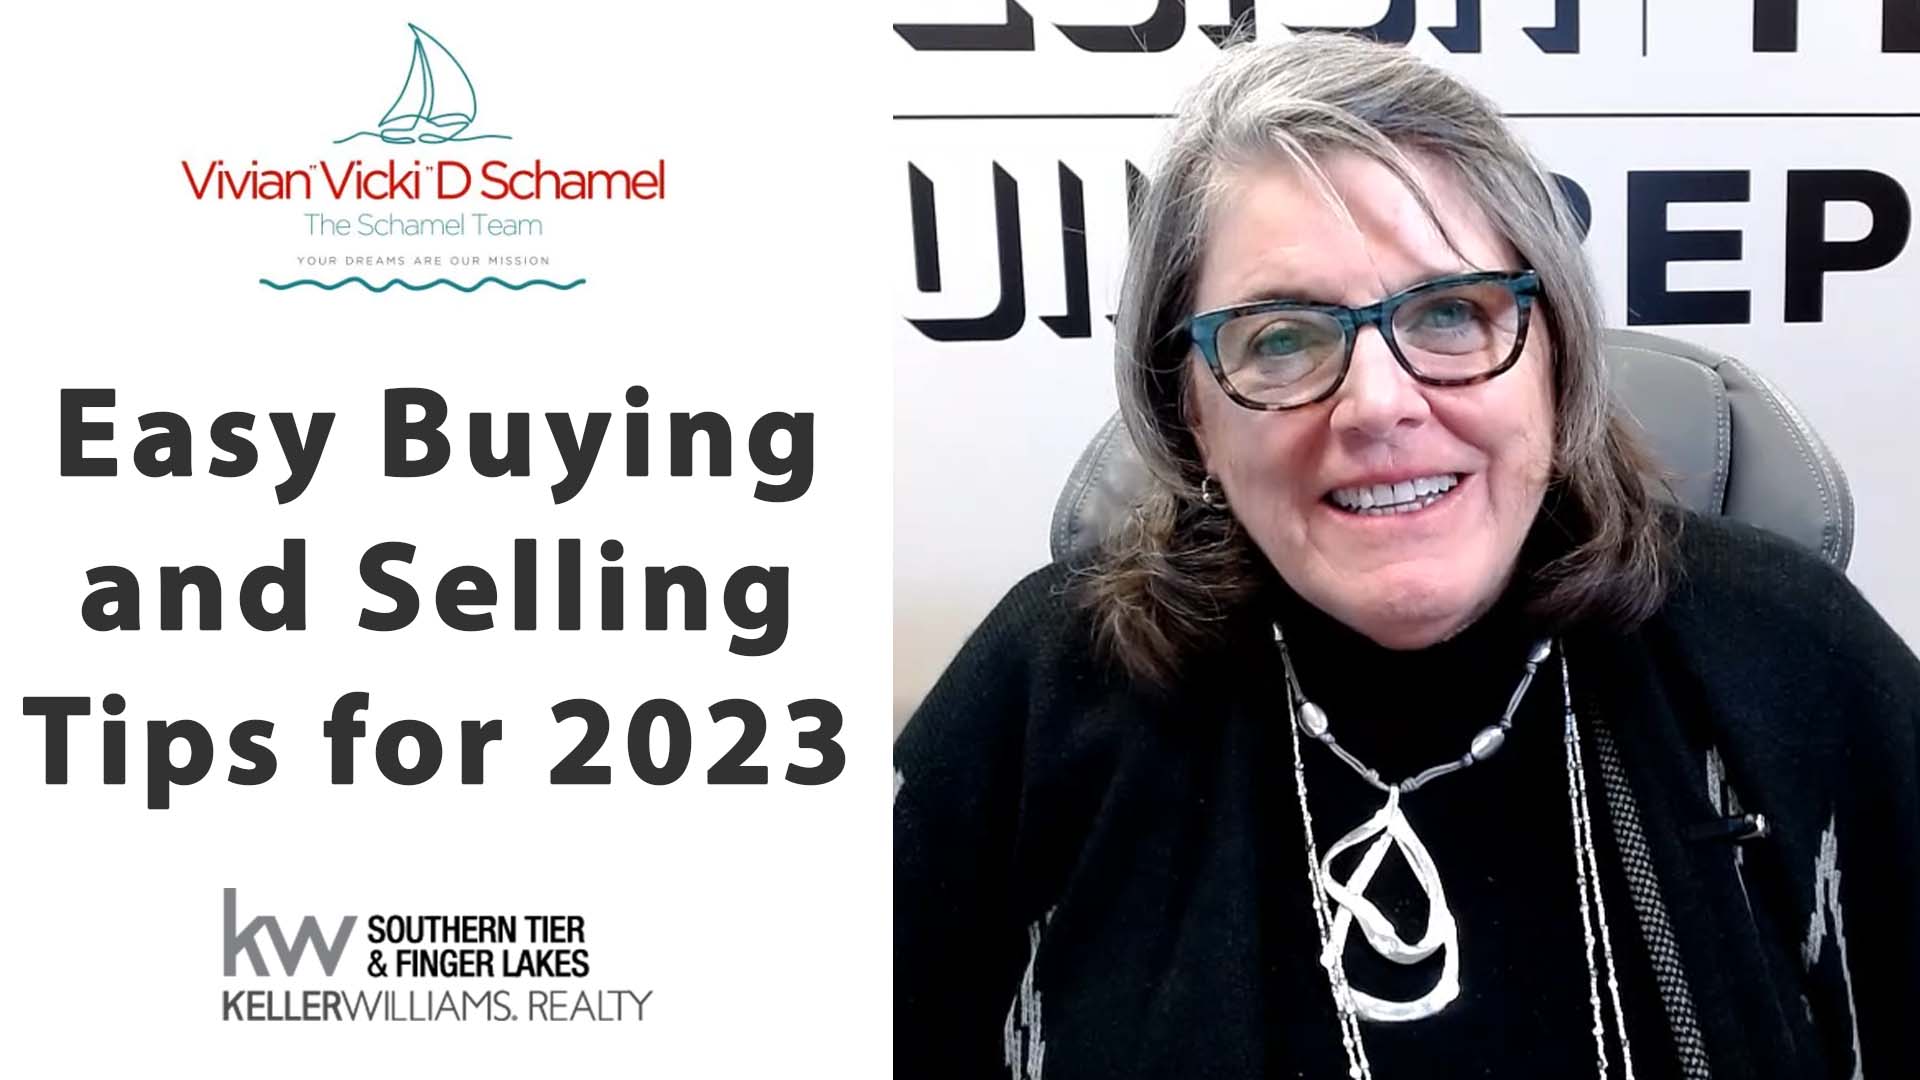 How To Make Buying or Selling Easier in 2023